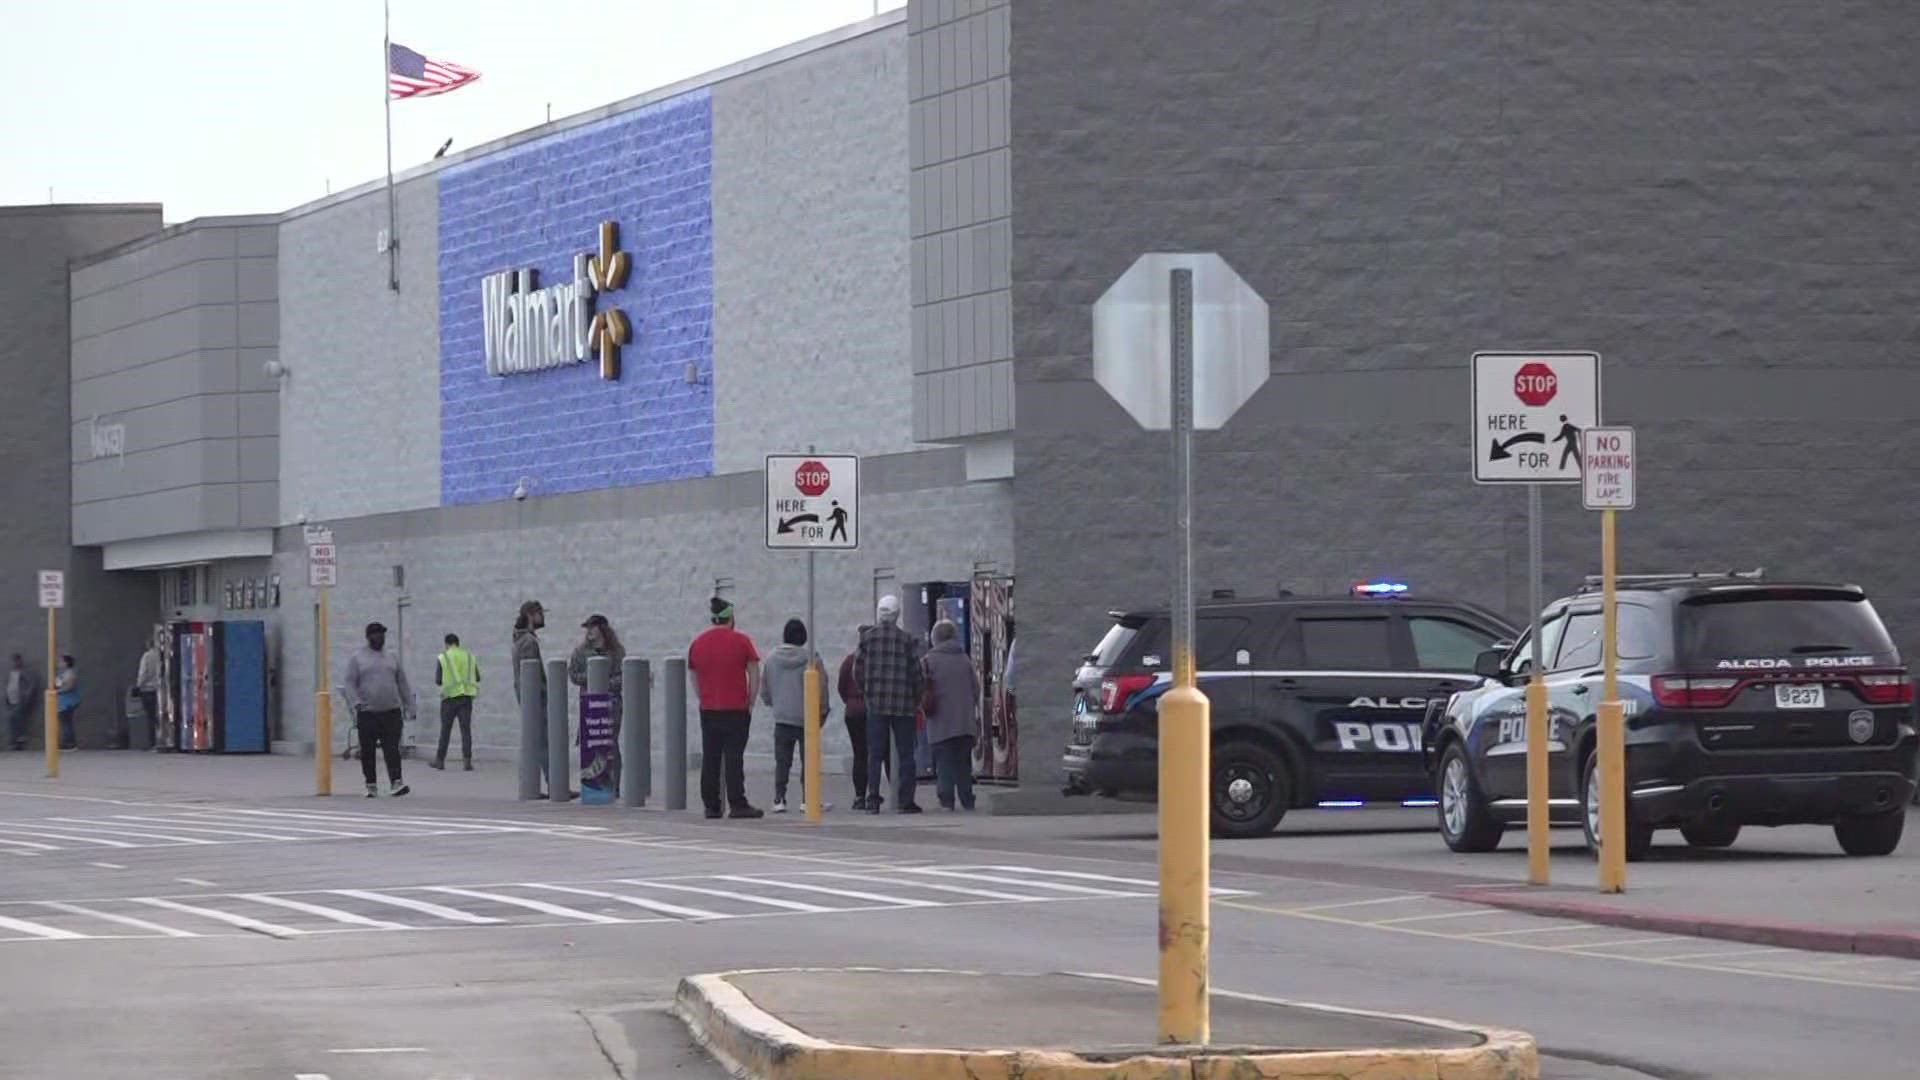 A spokesperson said that a false report led to speculation online about why there was a heavy police presence at an Alcoa Walmart.